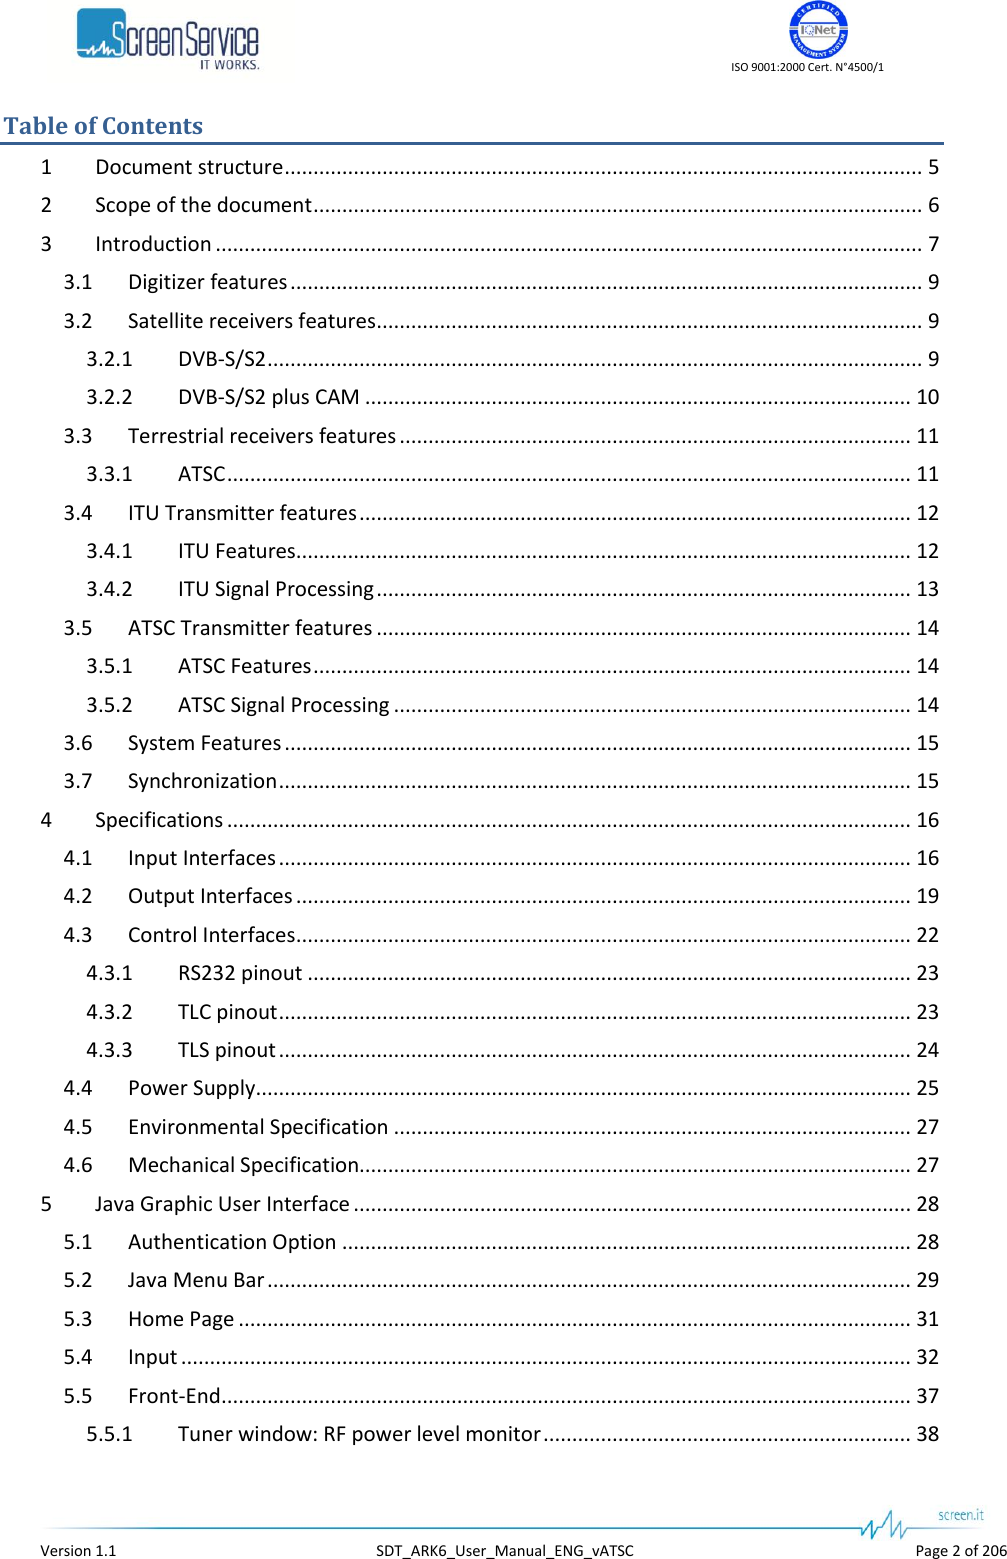    ISO 9001:2000 Cert. N°4500/1   Version 1.1  SDT_ARK6_User_Manual_ENG_vATSC  Page 2 of 206 Table of Contents 1  Document structure ............................................................................................................... 5 2  Scope of the document .......................................................................................................... 6 3  Introduction ........................................................................................................................... 7 3.1  Digitizer features .............................................................................................................. 9 3.2  Satellite receivers features ............................................................................................... 9 3.2.1  DVB-S/S2 .................................................................................................................. 9 3.2.2  DVB-S/S2 plus CAM ............................................................................................... 10 3.3  Terrestrial receivers features ......................................................................................... 11 3.3.1  ATSC ....................................................................................................................... 11 3.4  ITU Transmitter features ................................................................................................ 12 3.4.1  ITU Features........................................................................................................... 12 3.4.2  ITU Signal Processing ............................................................................................. 13 3.5  ATSC Transmitter features ............................................................................................. 14 3.5.1  ATSC Features ........................................................................................................ 14 3.5.2  ATSC Signal Processing .......................................................................................... 14 3.6  System Features ............................................................................................................. 15 3.7  Synchronization .............................................................................................................. 15 4  Specifications ....................................................................................................................... 16 4.1  Input Interfaces .............................................................................................................. 16 4.2  Output Interfaces ........................................................................................................... 19 4.3  Control Interfaces ........................................................................................................... 22 4.3.1  RS232 pinout ......................................................................................................... 23 4.3.2  TLC pinout .............................................................................................................. 23 4.3.3  TLS pinout .............................................................................................................. 24 4.4  Power Supply .................................................................................................................. 25 4.5  Environmental Specification .......................................................................................... 27 4.6  Mechanical Specification................................................................................................ 27 5  Java Graphic User Interface ................................................................................................. 28 5.1  Authentication Option ................................................................................................... 28 5.2  Java Menu Bar ................................................................................................................ 29 5.3  Home Page ..................................................................................................................... 31 5.4  Input ............................................................................................................................... 32 5.5  Front-End ........................................................................................................................ 37 5.5.1  Tuner window: RF power level monitor ................................................................ 38 